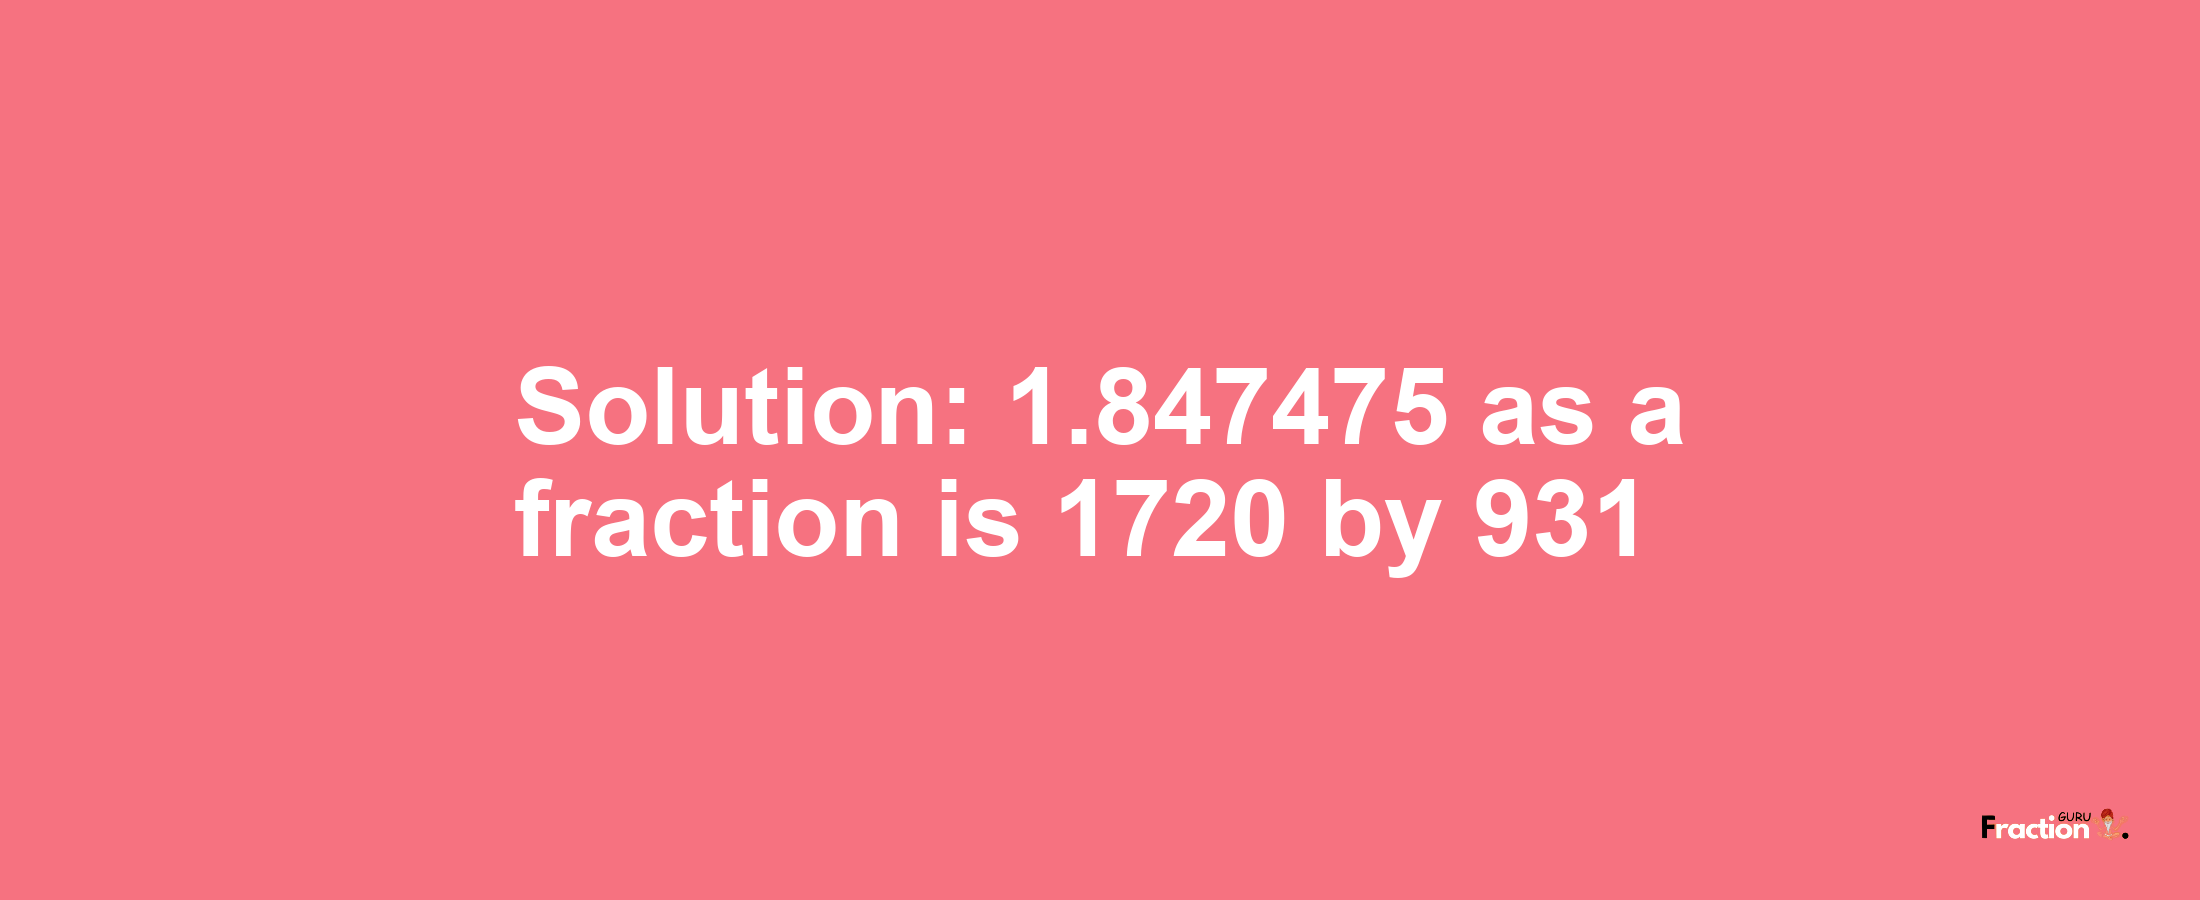 Solution:1.847475 as a fraction is 1720/931